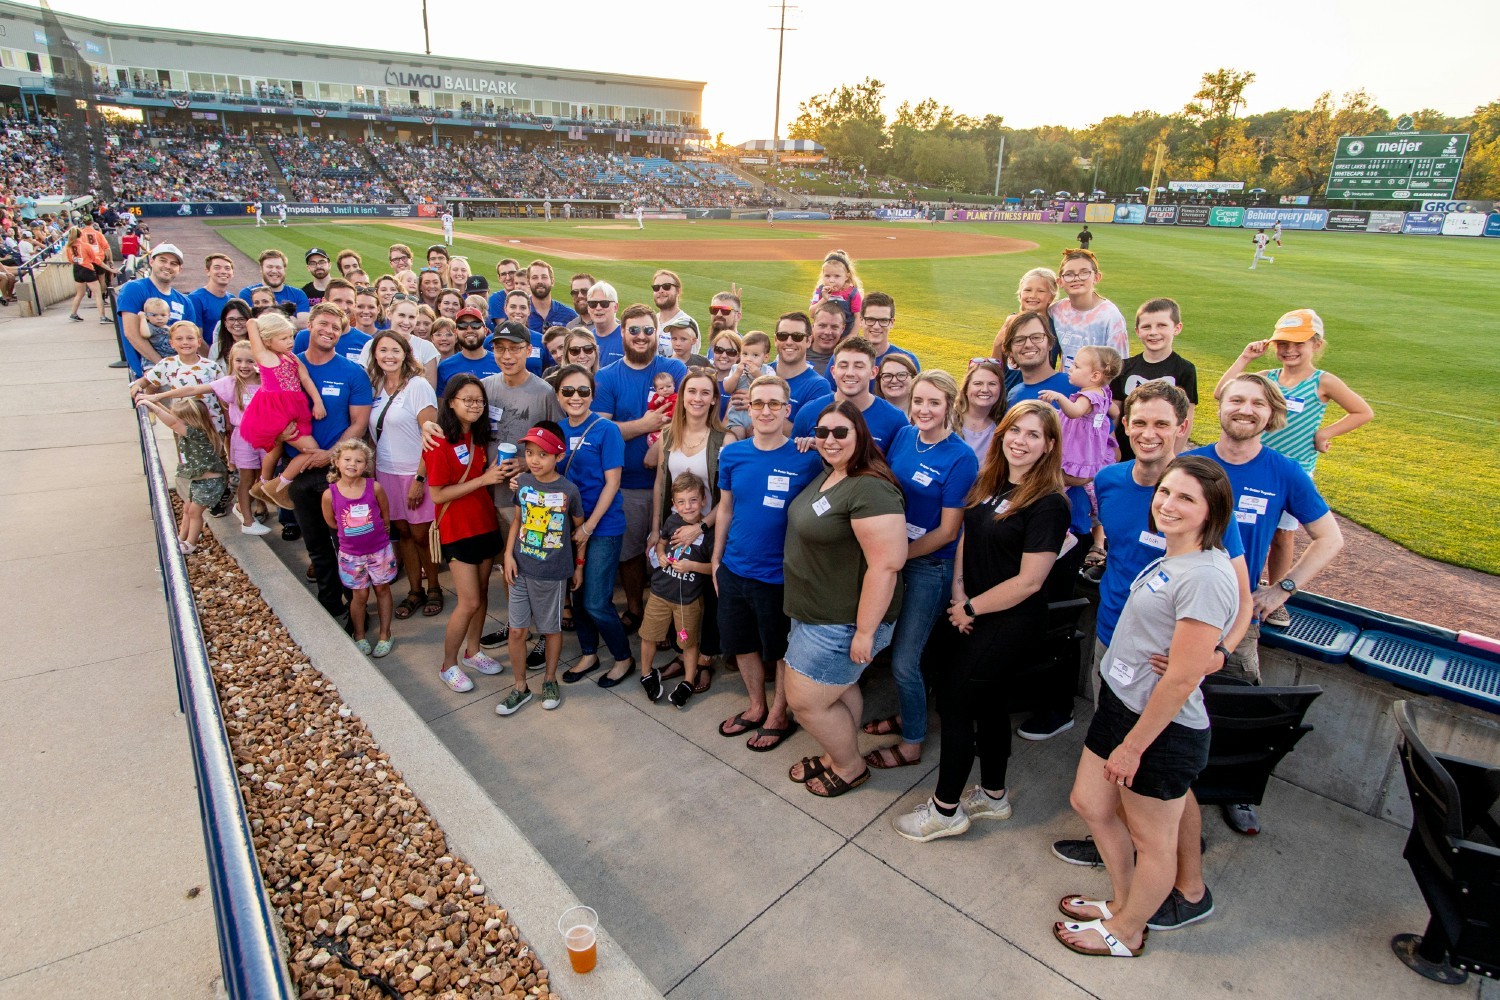 Michigan Software Labs spends an evening at a Whitecaps baseball game with their families at the LMCU Ballpark.
